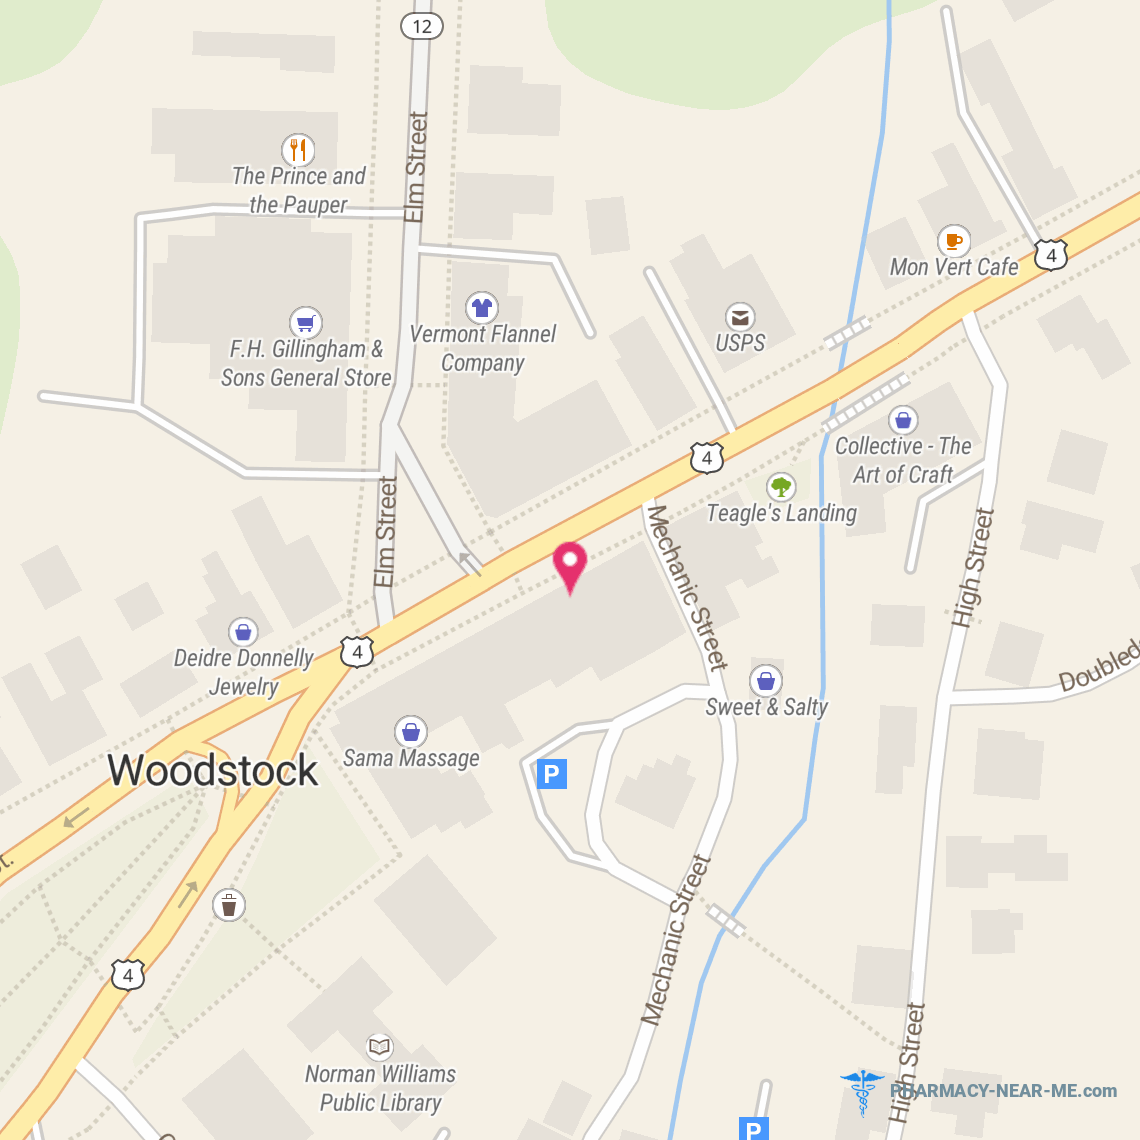 WOODSTOCK PHARMACY INC - Pharmacy Hours, Phone, Reviews & Information: 19 Central Street, Woodstock, Vermont 05091, United States